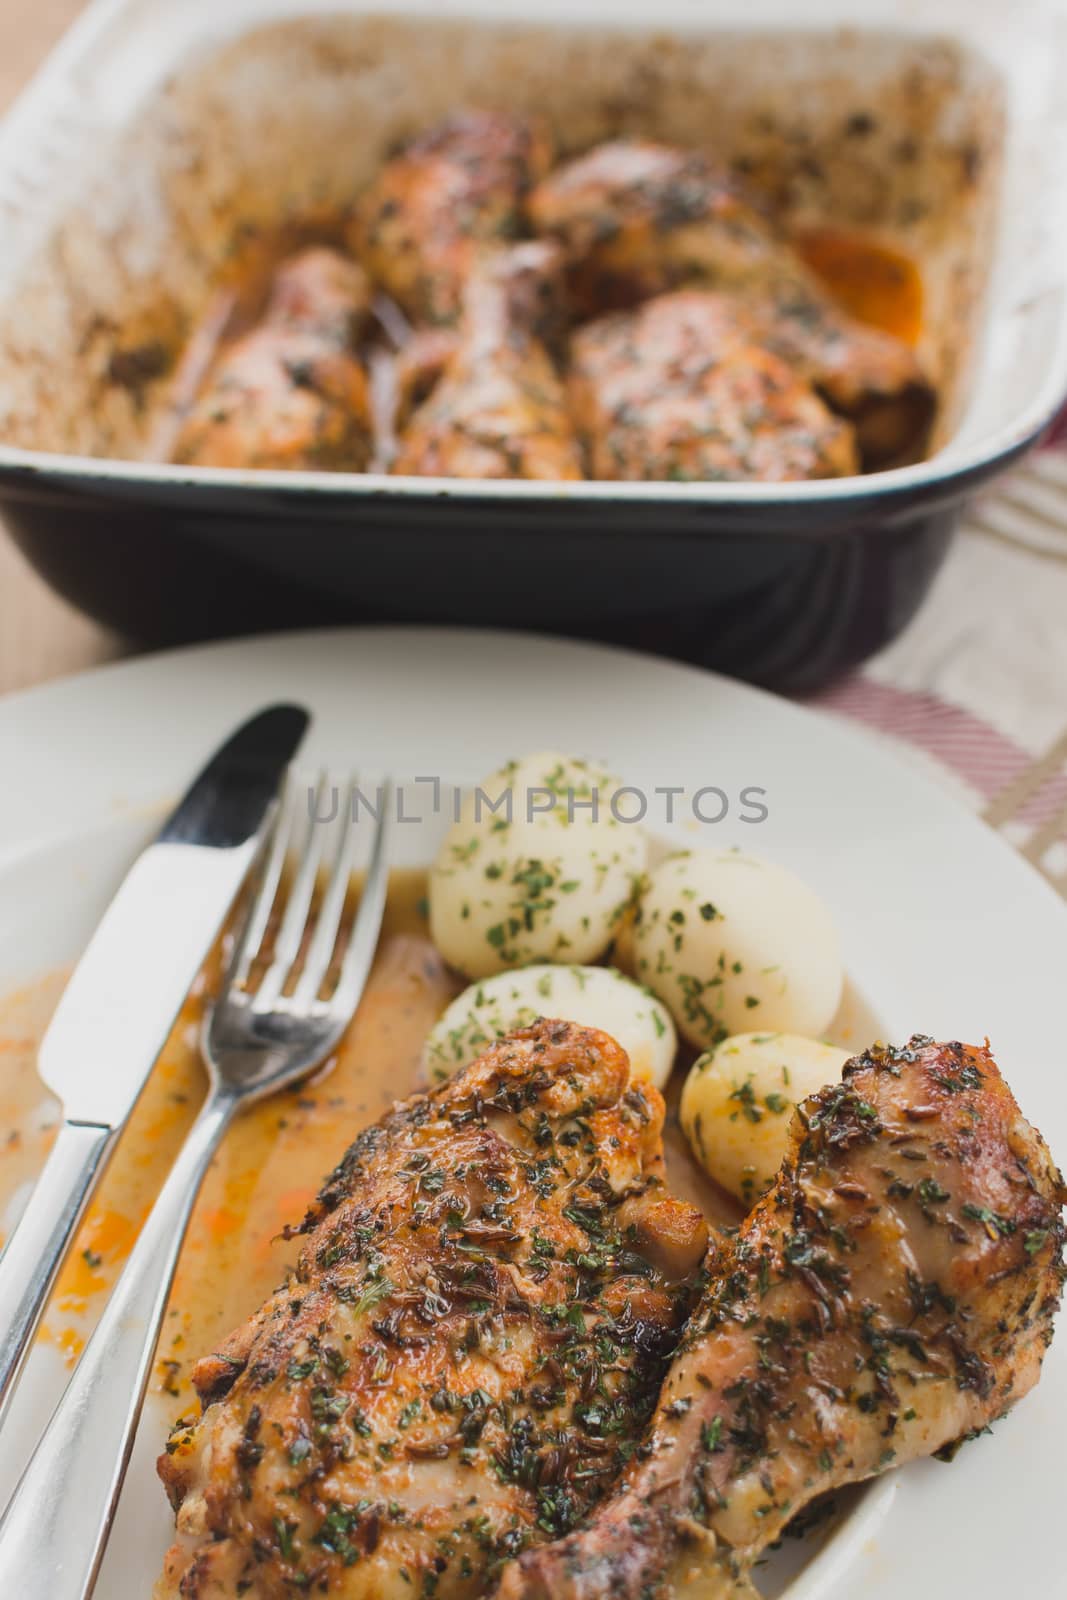 baked chicken drumsticks on a plate with potatoes, chicken in the oven dish with herbs